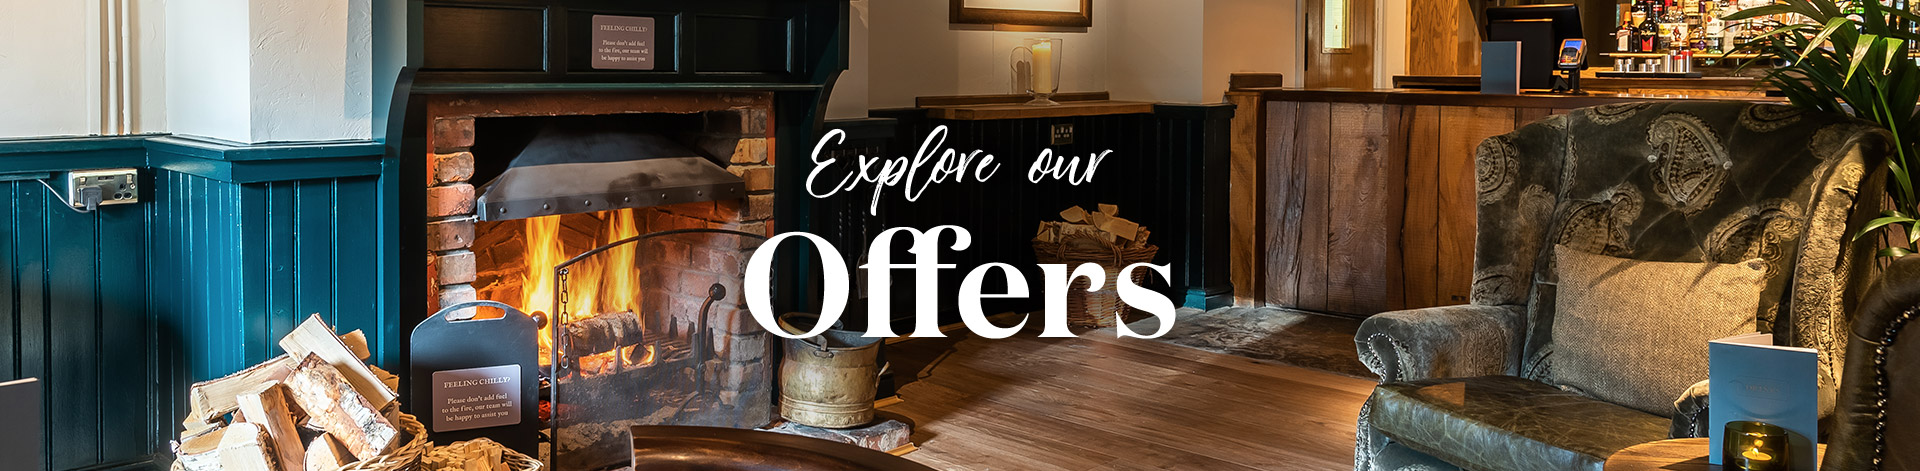 Our latest offers at The Baker's Arms